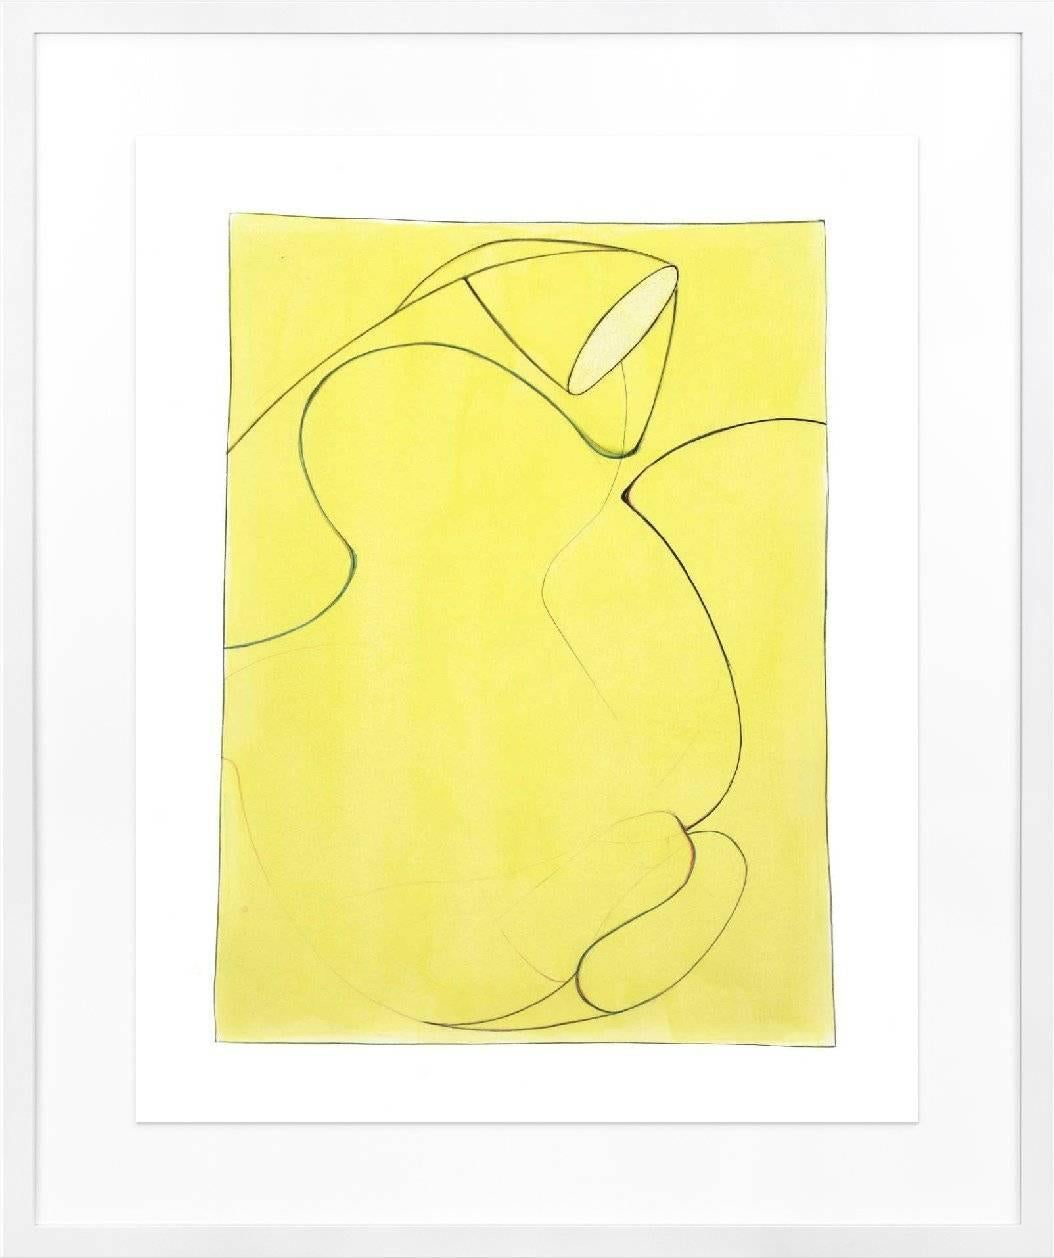 All artworks are limited edition prints. All works are printed on high-quality archival cotton rag paper. This piece is an exclusive limited edition of 50.

Guy's drawings are meditations on future large-scale sculptures. We love the cheerfulness of